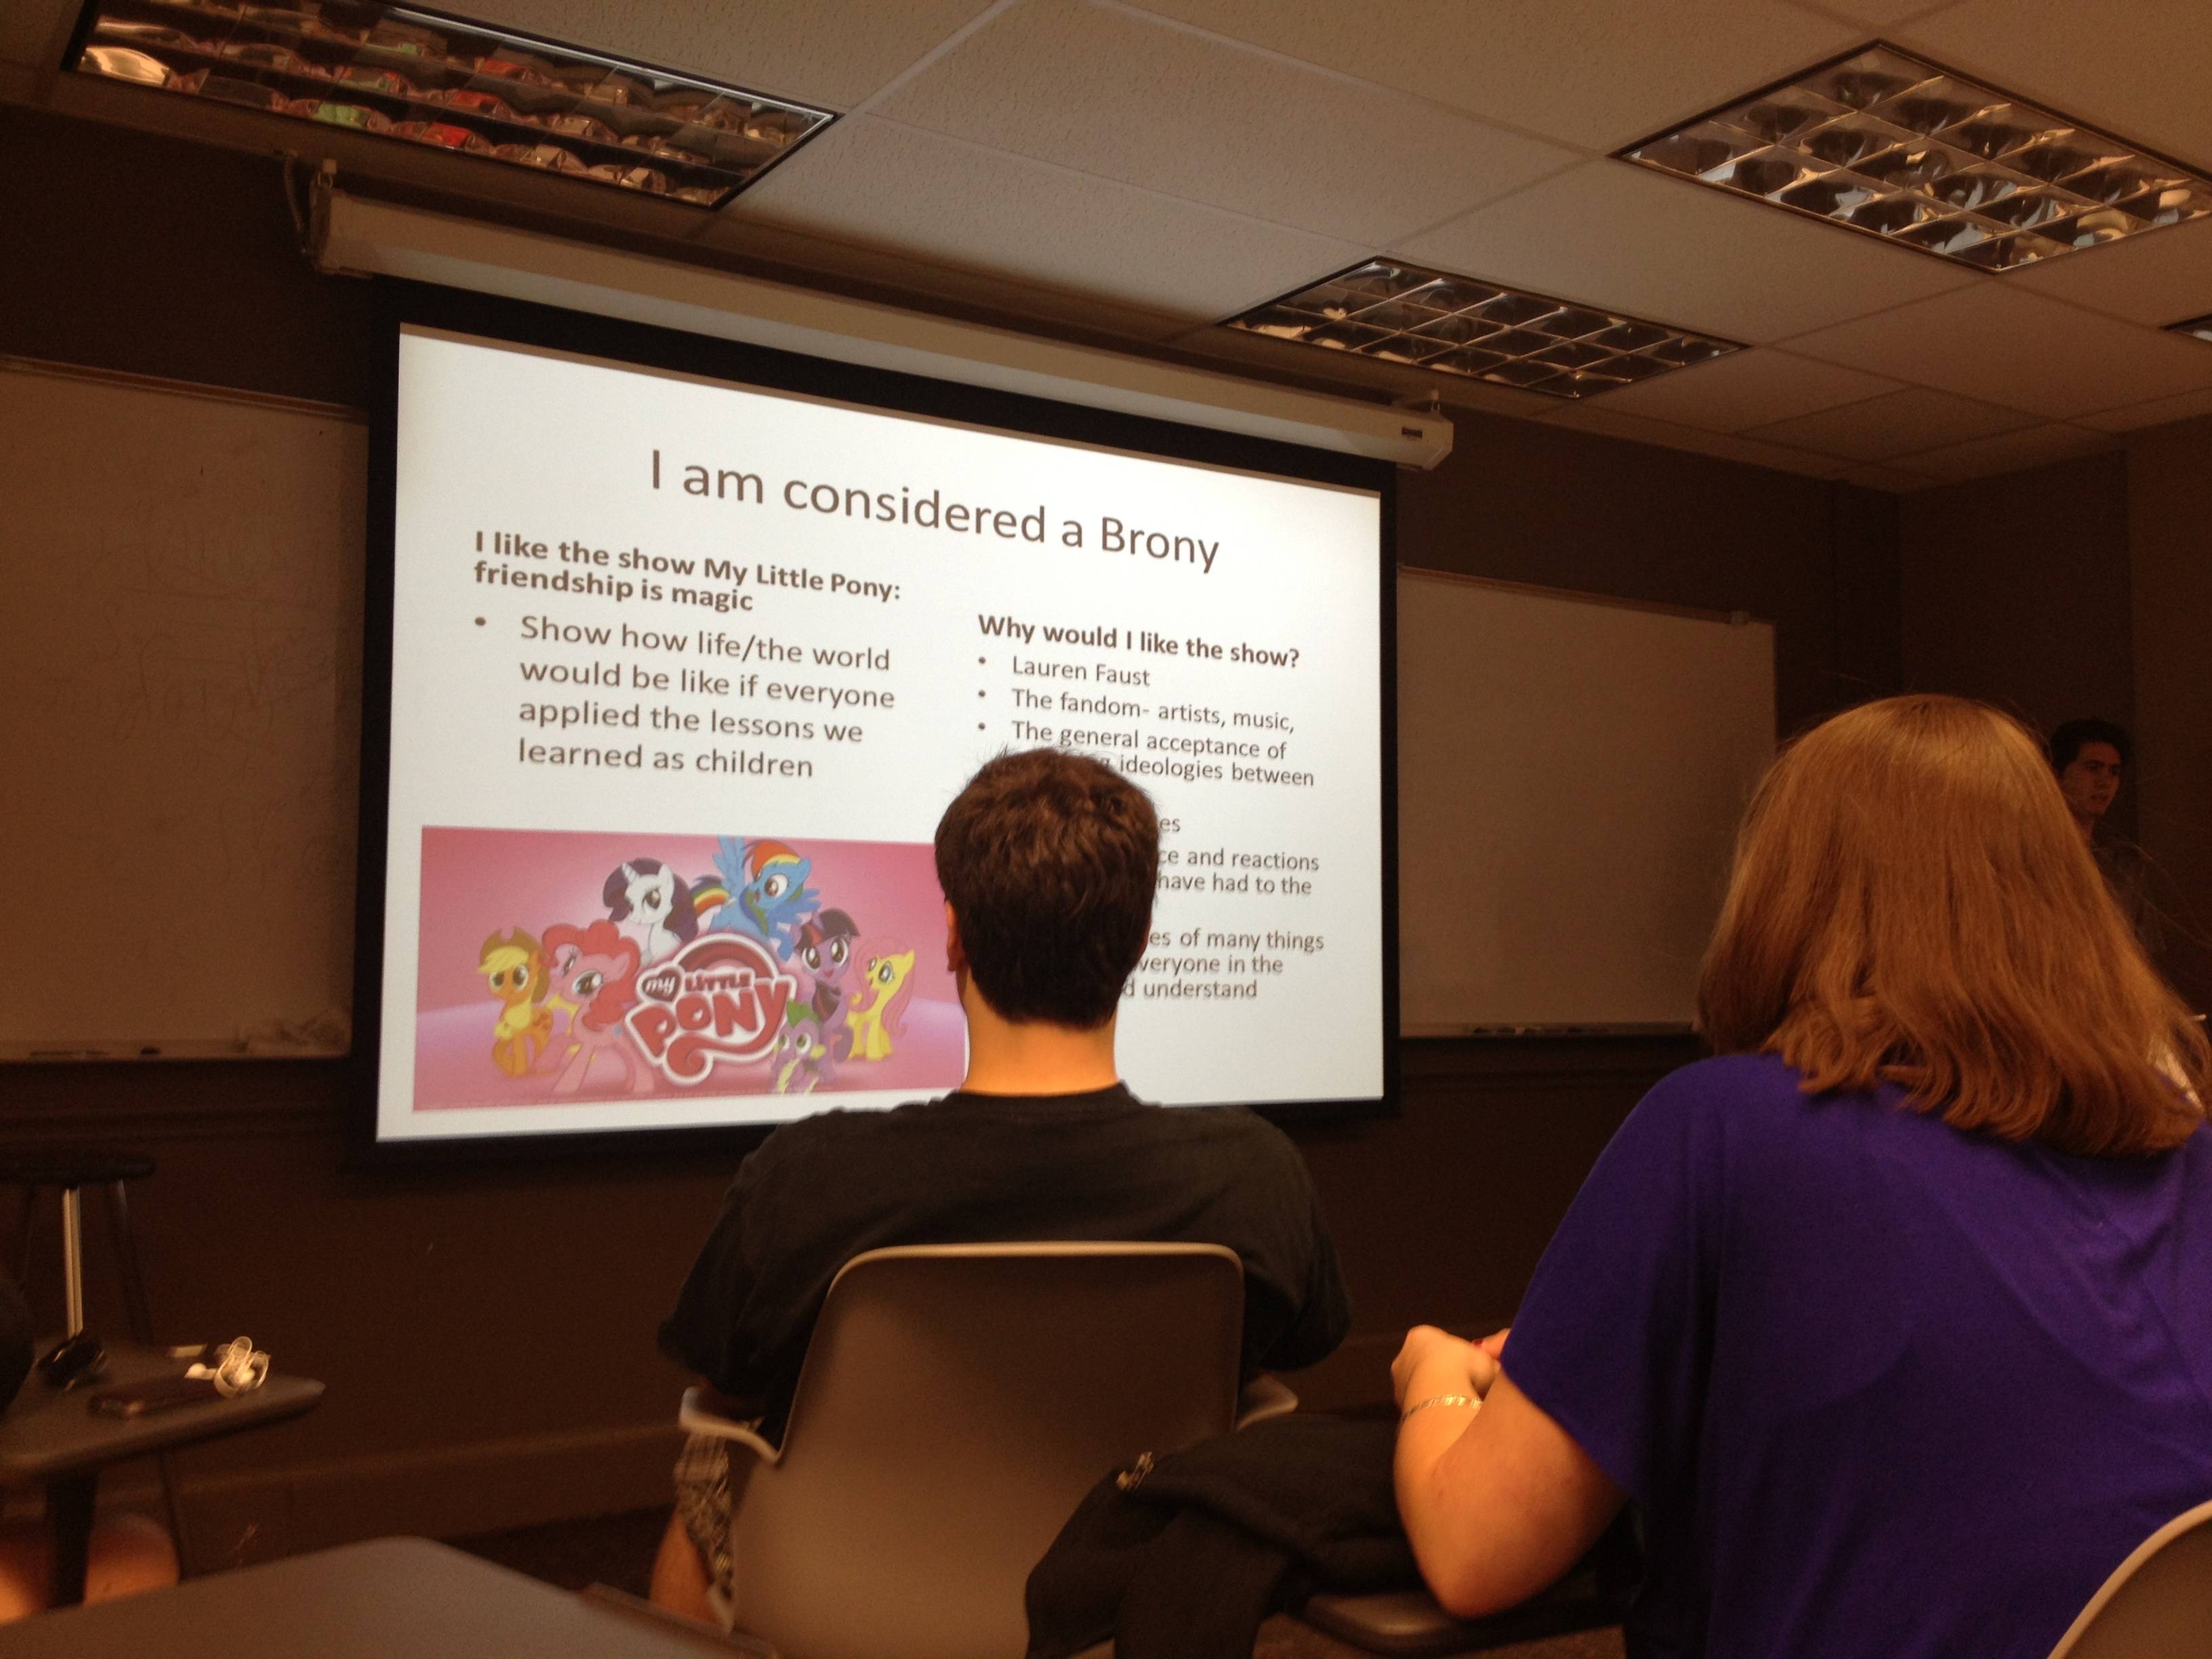 cursed images school presentations - I am considered a Brony I the show My Little Pony friendship is magic Show how lifethe world would be if everyone applied the lessons we learned as children Why would the show! . The aroma, route understand